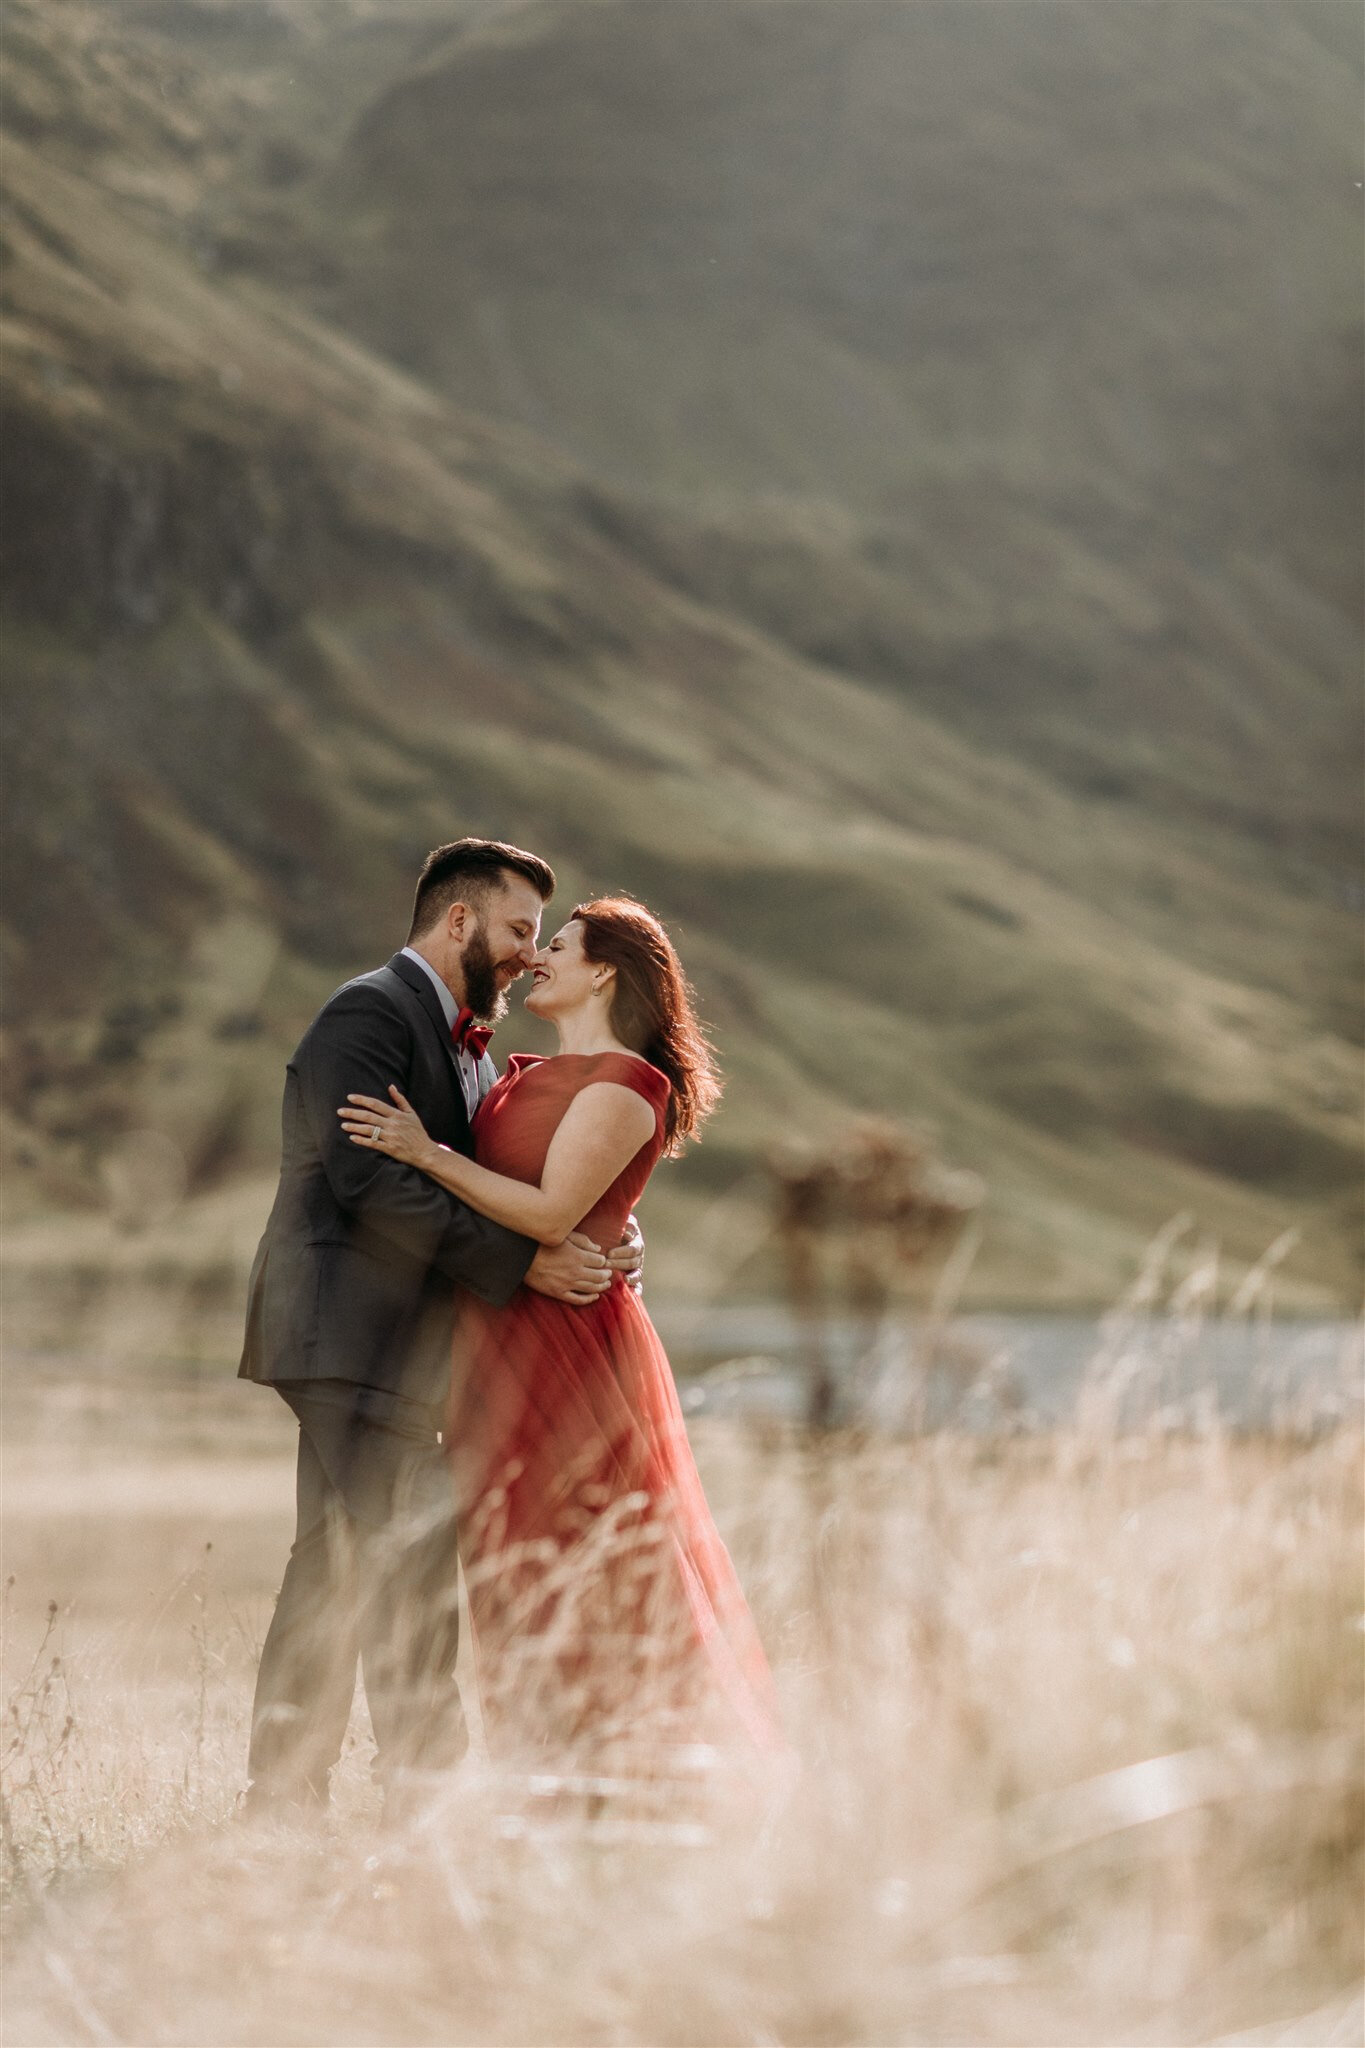 Glen Coe Scotland elopement. Bride in red dress and her groom holding each other and smiling in a field in the Scottish Highlands | Adventure elopement photographer